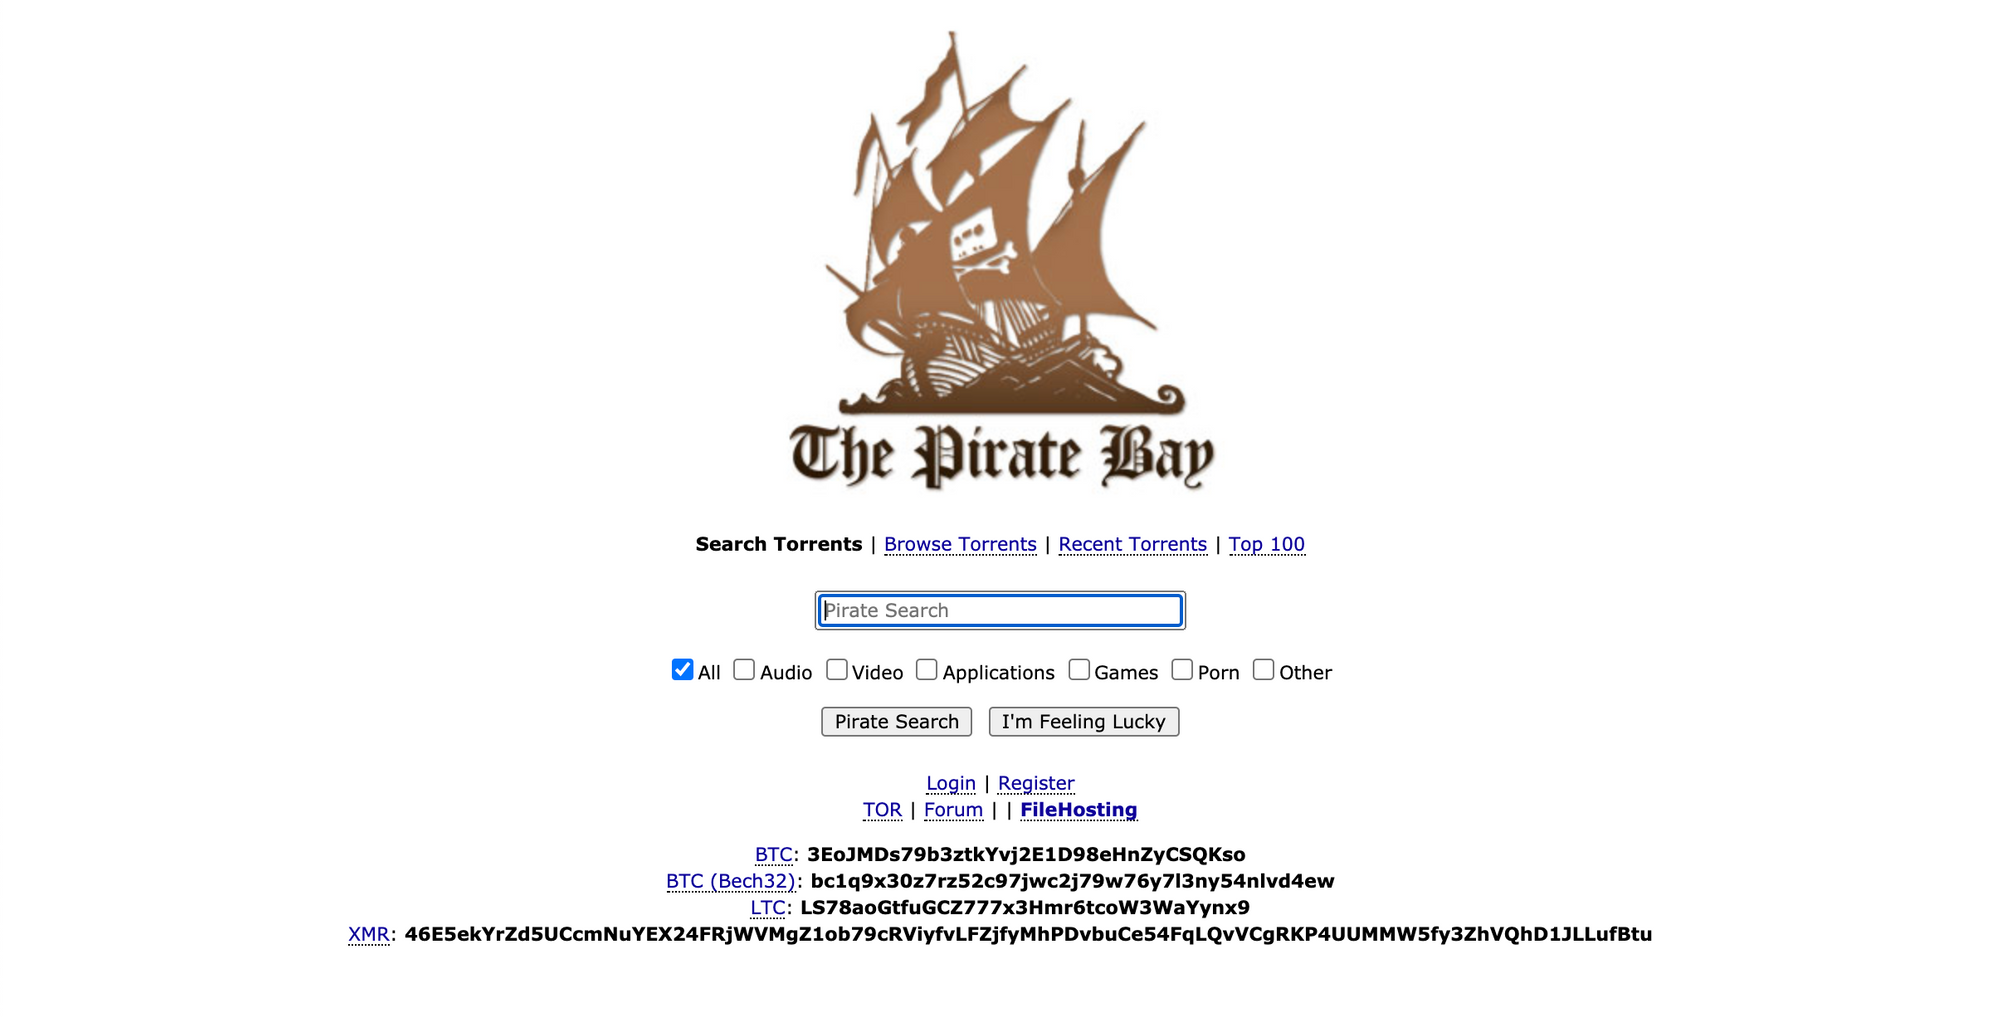 Proxy For Pirate Bay Here's Why You Shouldn't Use Pirate Bay Without VPN